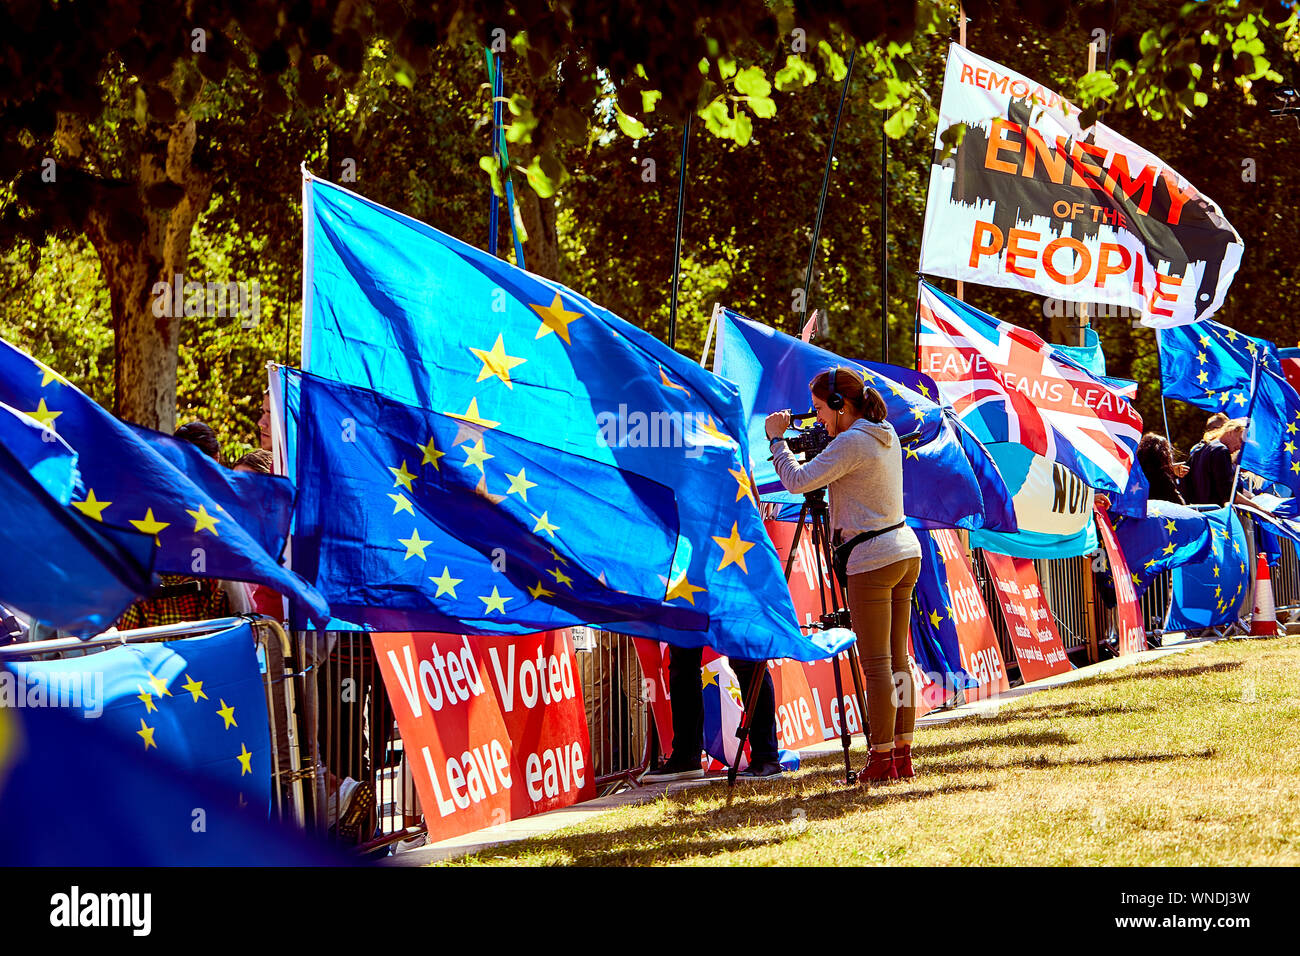 London, U.K. - September 5, 2019: A camera operator films protestors outside Parliament amongst flags and banners a month before the UK is due to leave the EU. Stock Photo